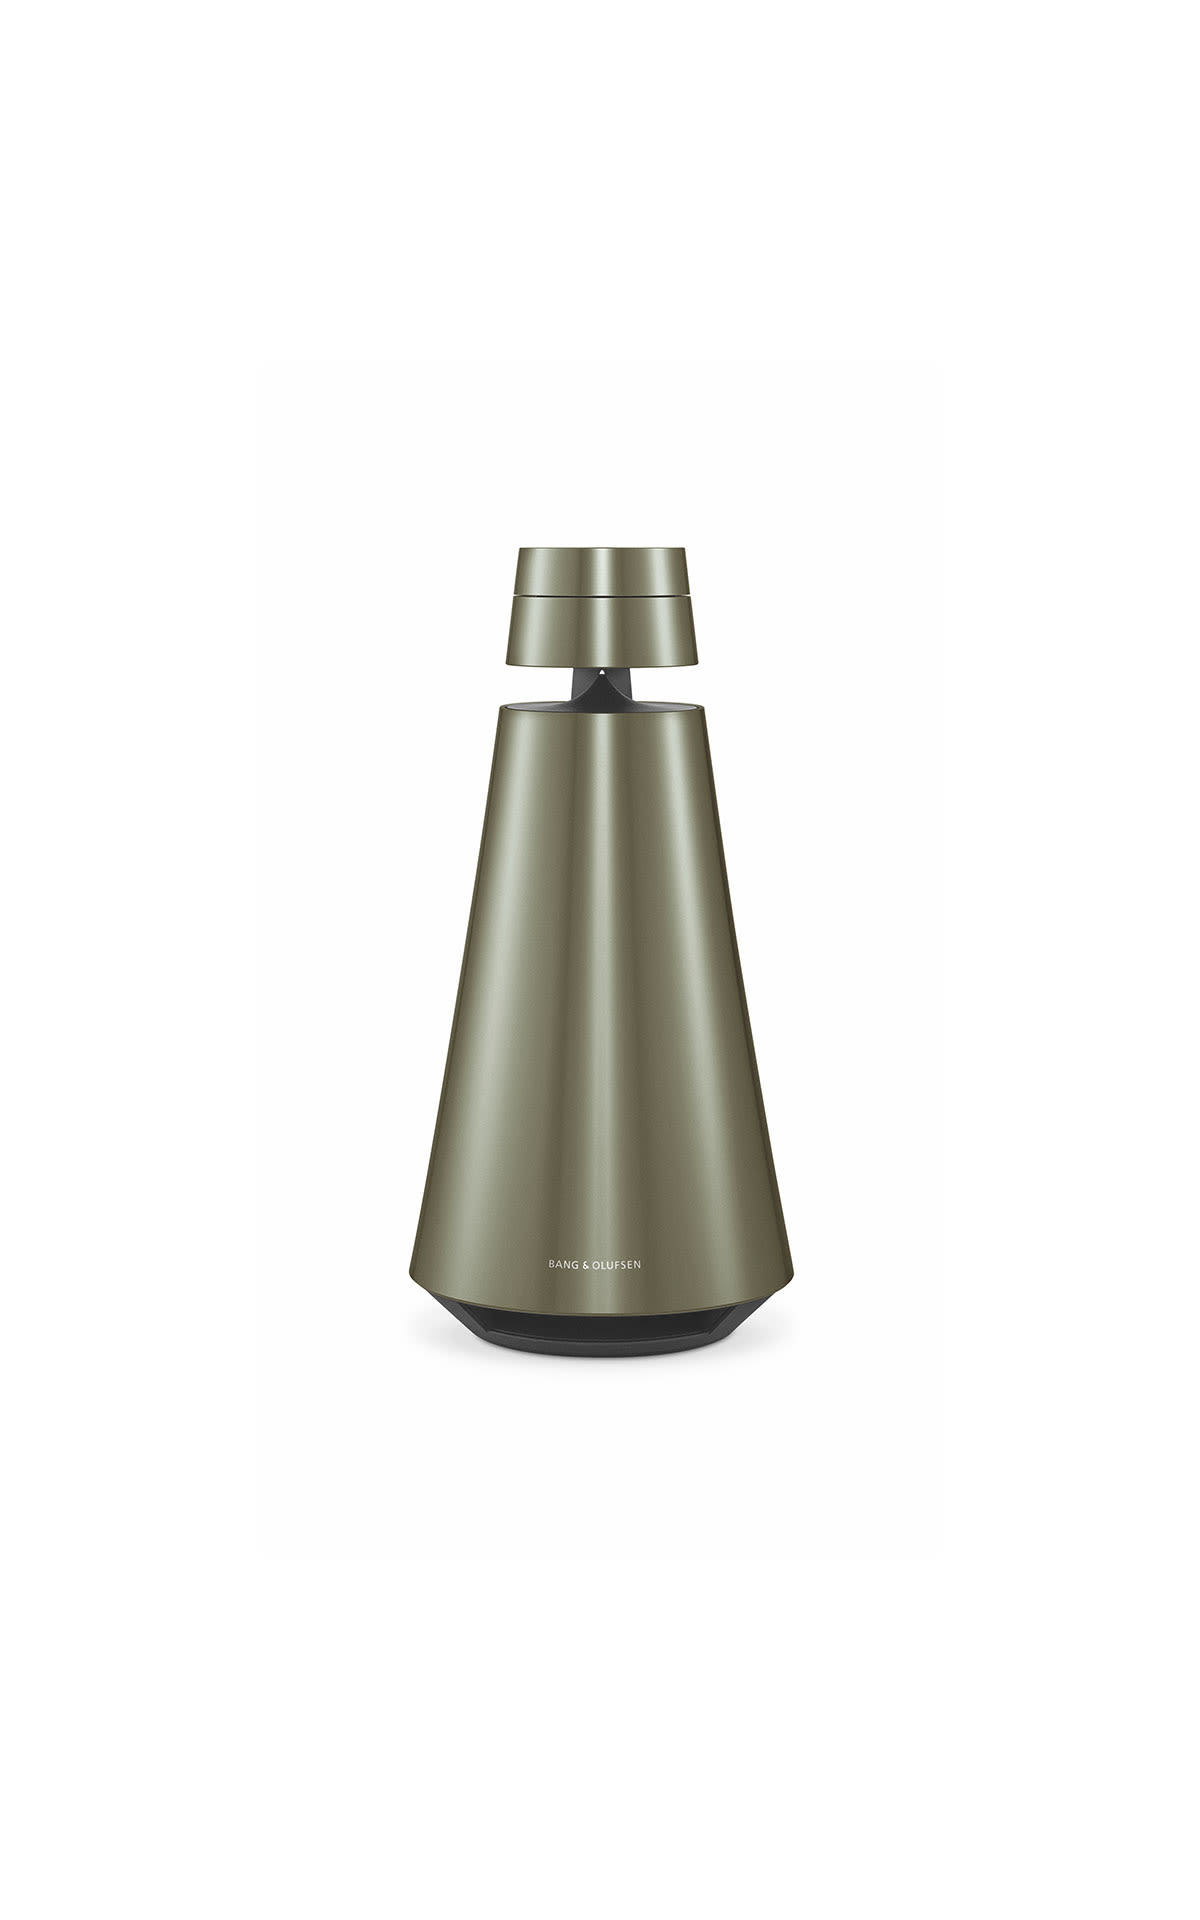 Bang & Olufsen BeoSound 1 infantry green from Bicester Village